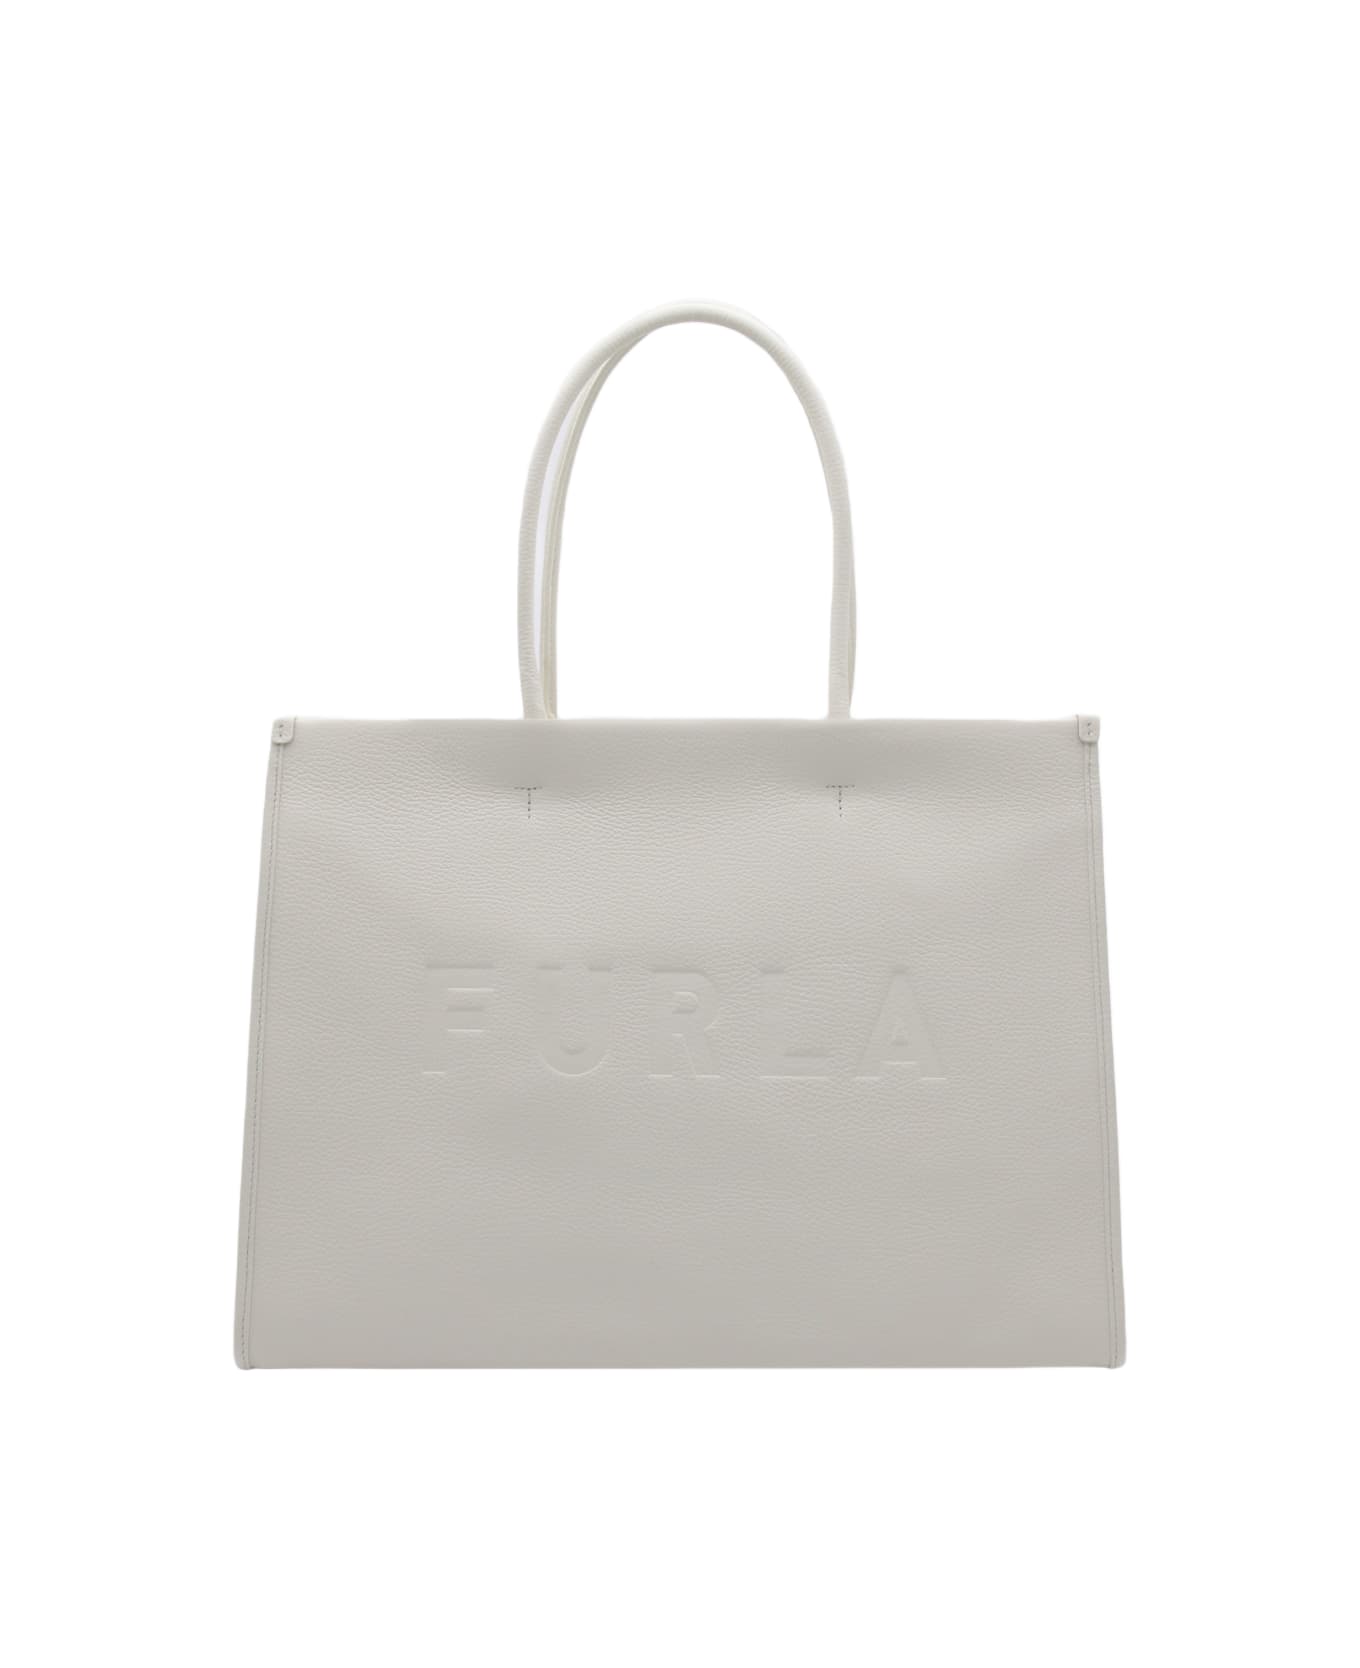 Furla Marshmallow Leather Opportunity Tote Bag - MARSHMALLOW